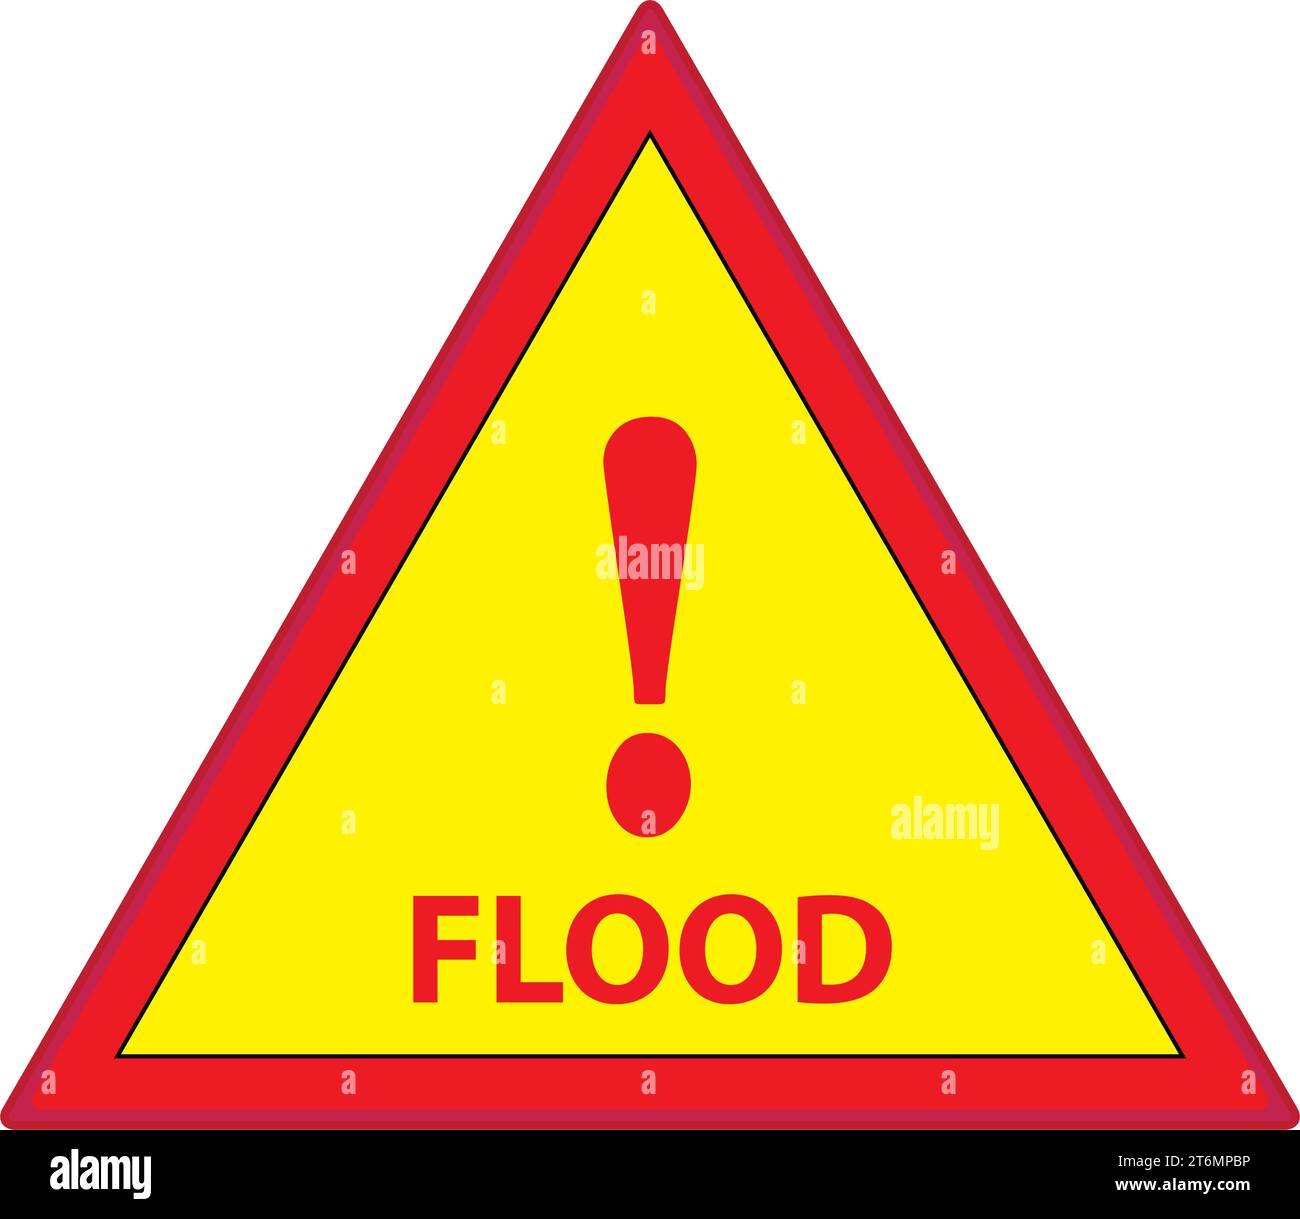 Caution signs. Symbols of danger and flood warning signs. warning attention. danger sign. Exclamation marks. attention vector icon. Triangular warning Stock Vector